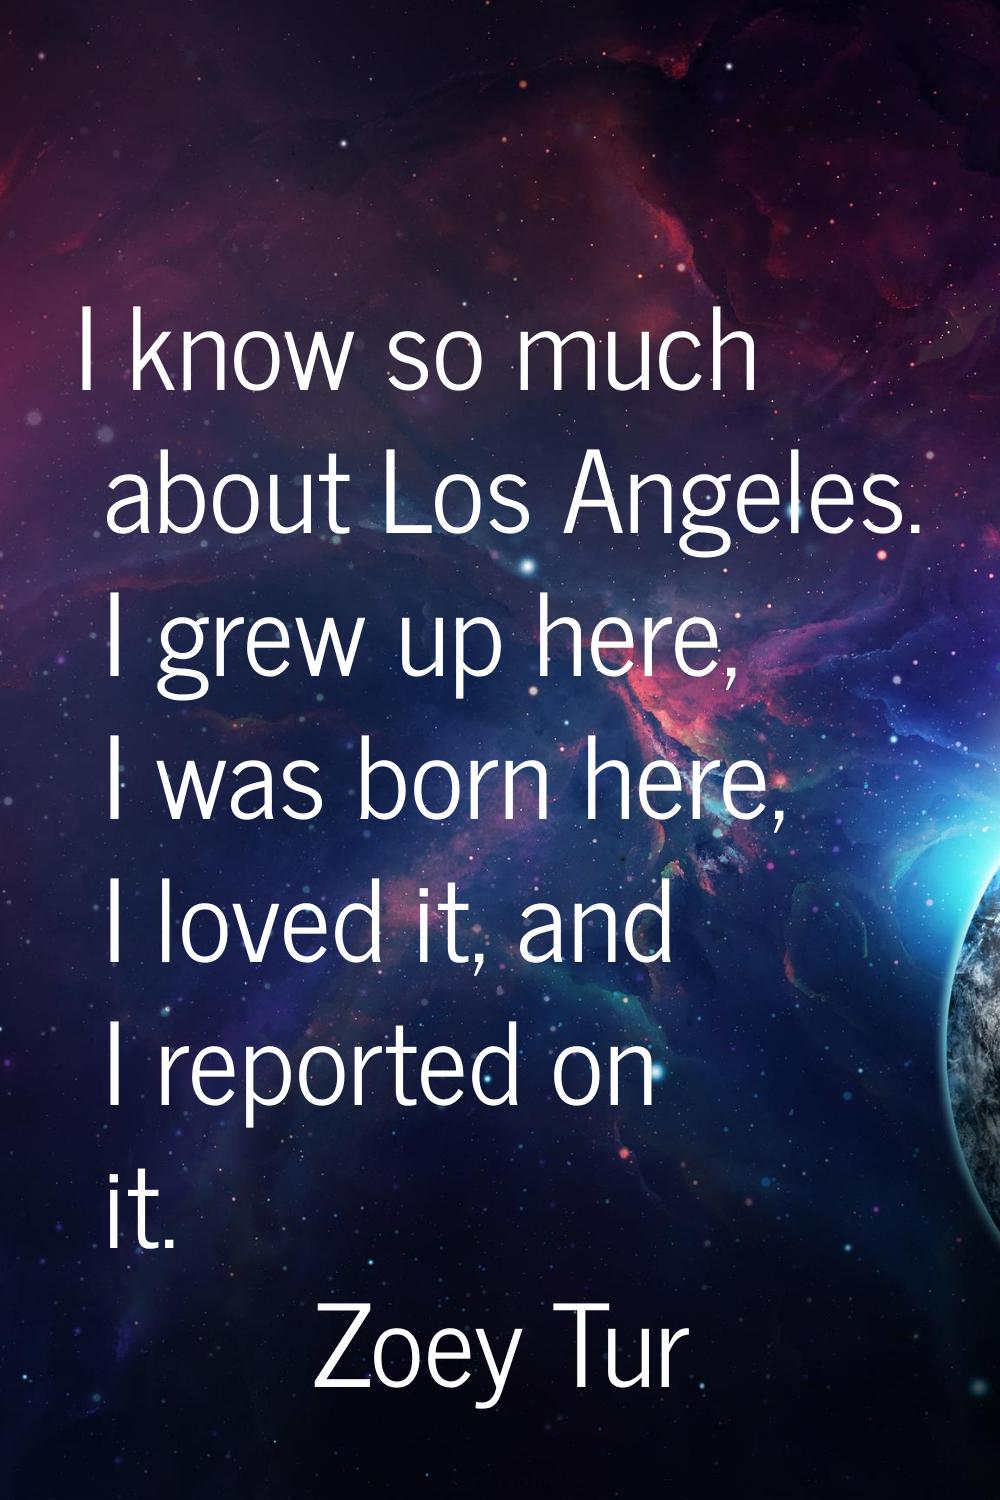 I know so much about Los Angeles. I grew up here, I was born here, I loved it, and I reported on it